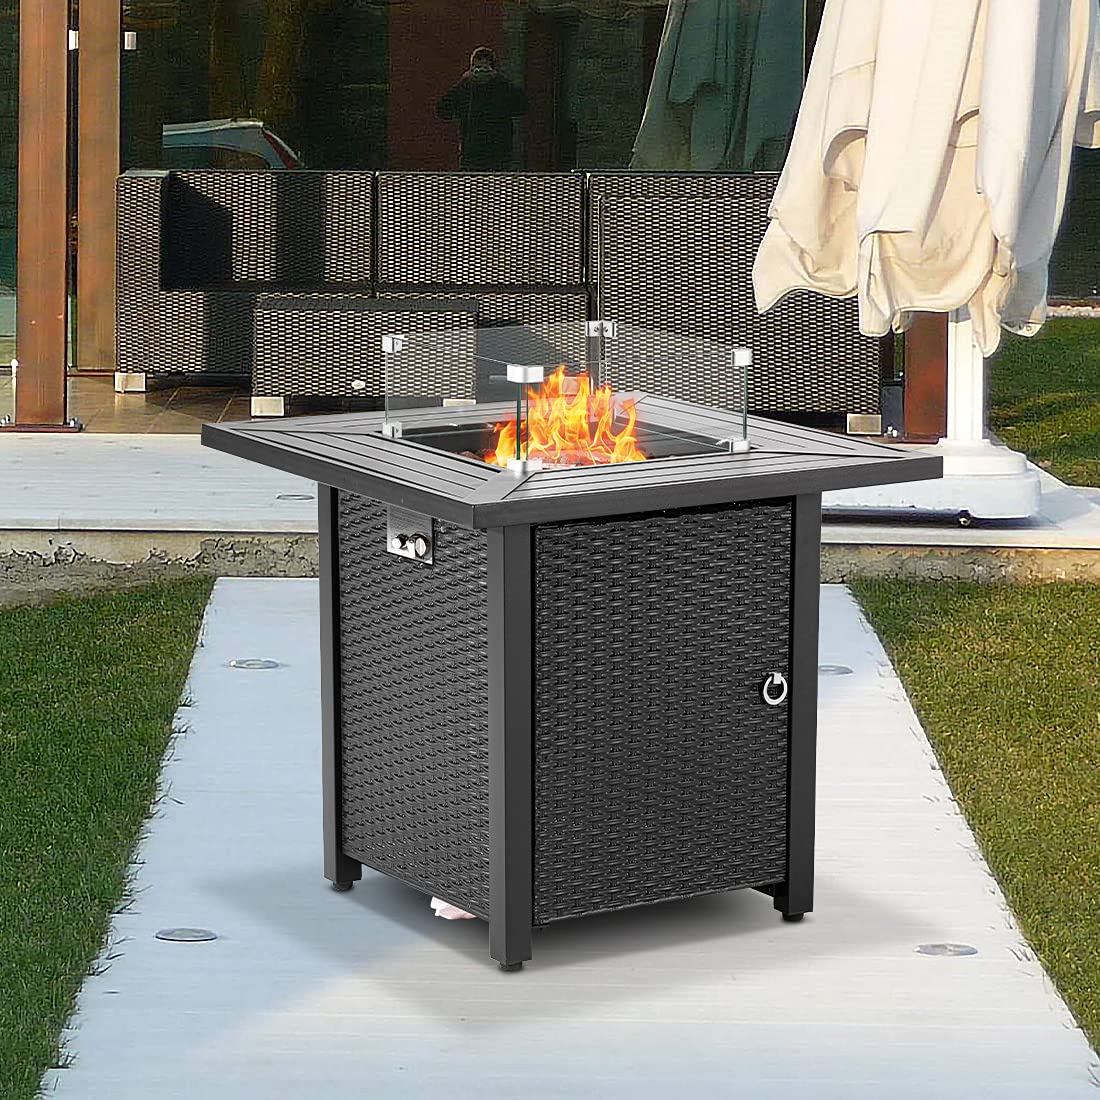 SUNBURY Outdoor Propane Fire Pit Table, 28 Inch Patio Gas Fire Table 40,000 BTU Auto-Ignition, Black Brown Rattan-Look Outdoor Companion w Lid, Waterproof Cover, Lava Rocks, Glass Wind Guard